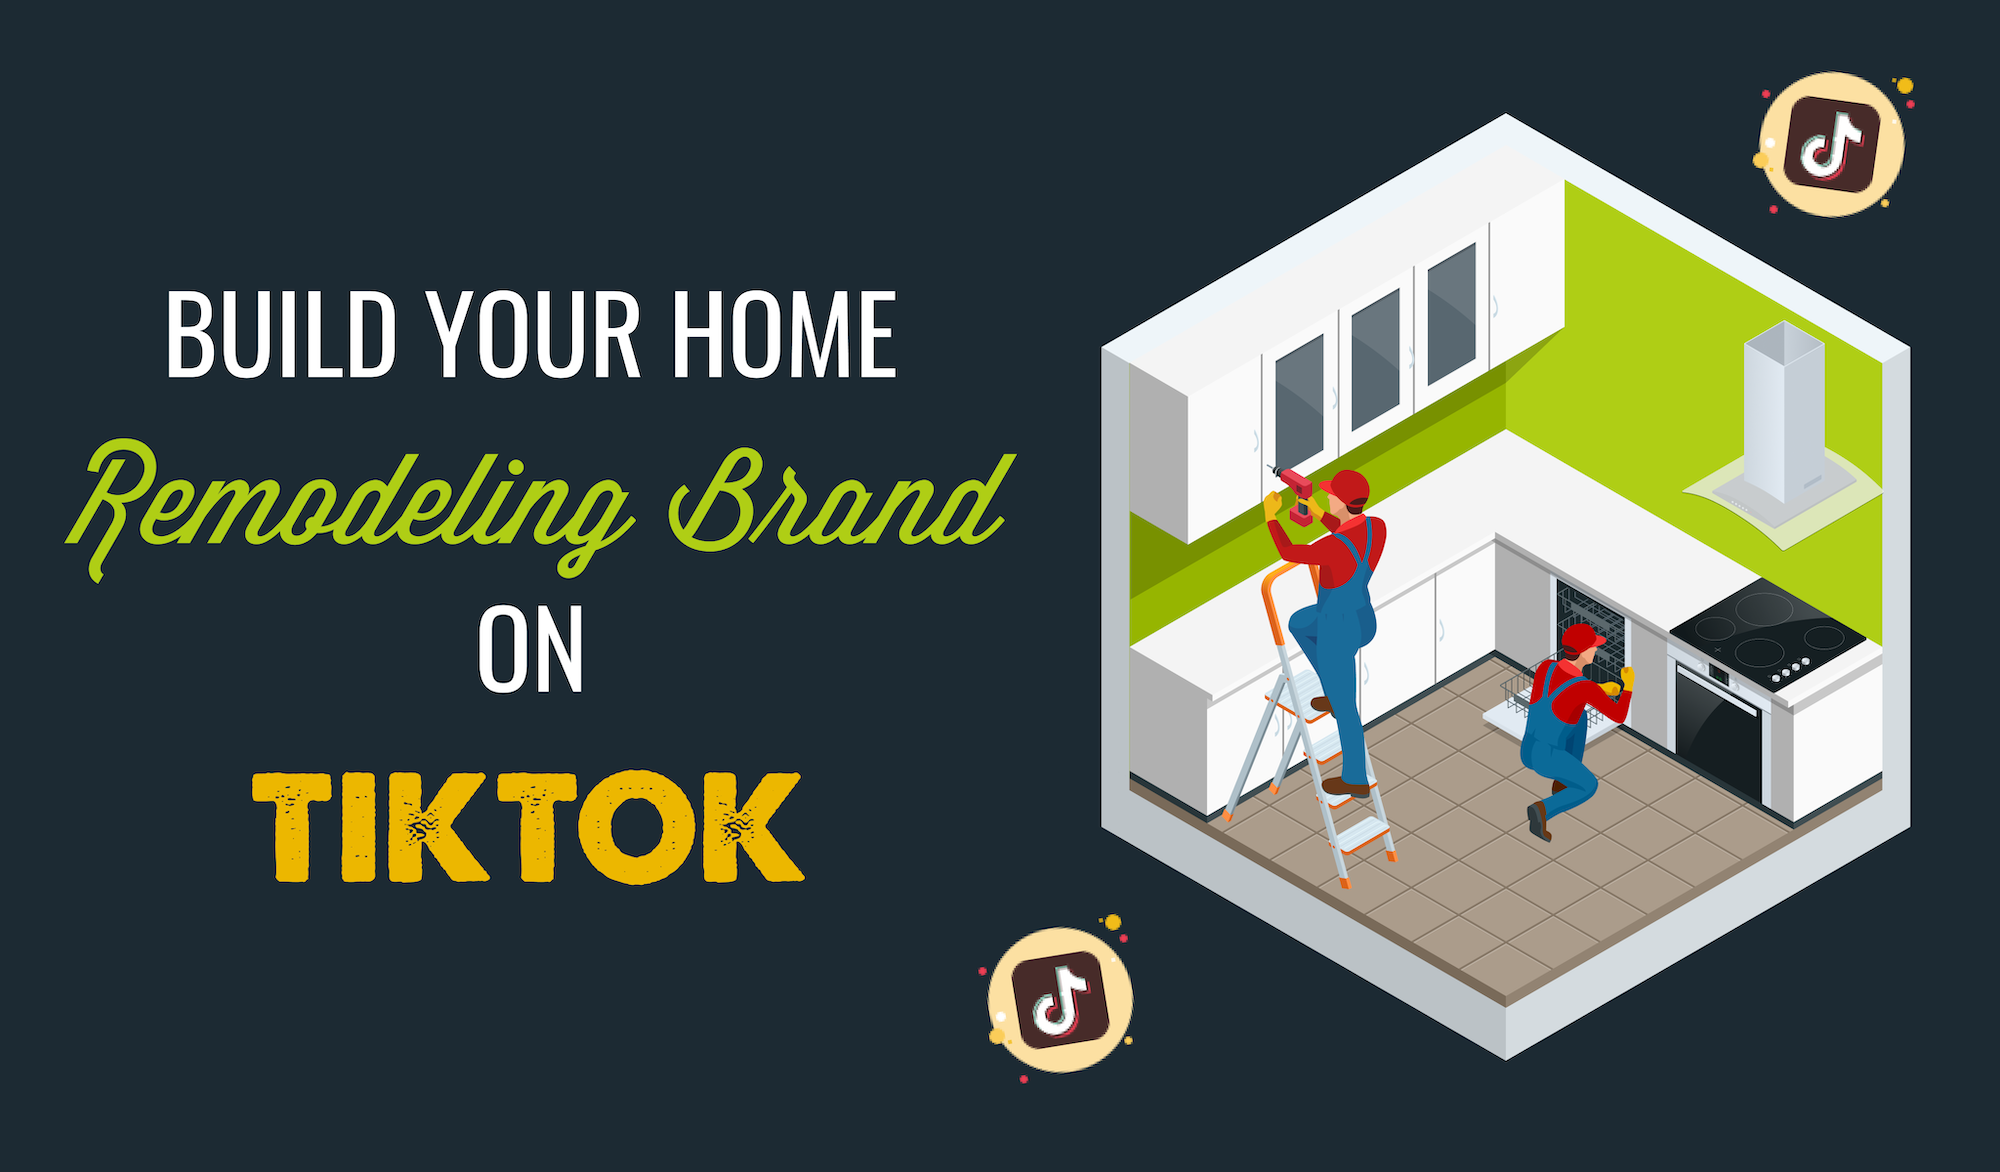 DO HOME REMODELERS NEED TO BE ON TIKTOK?